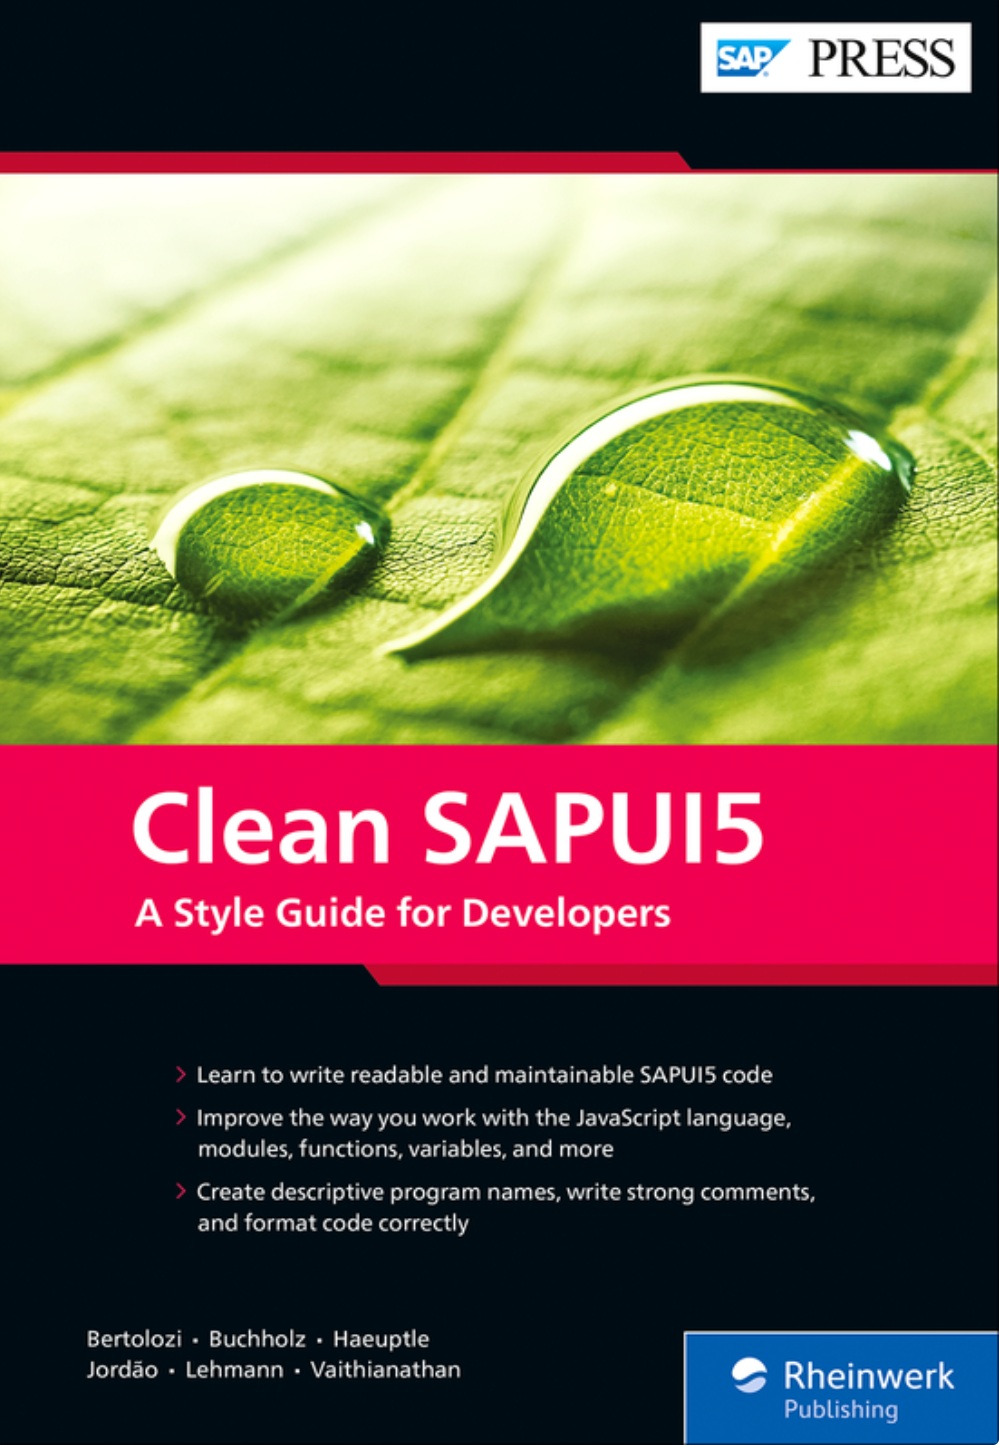 Clean SAPUI5 A Style Guide for Developers